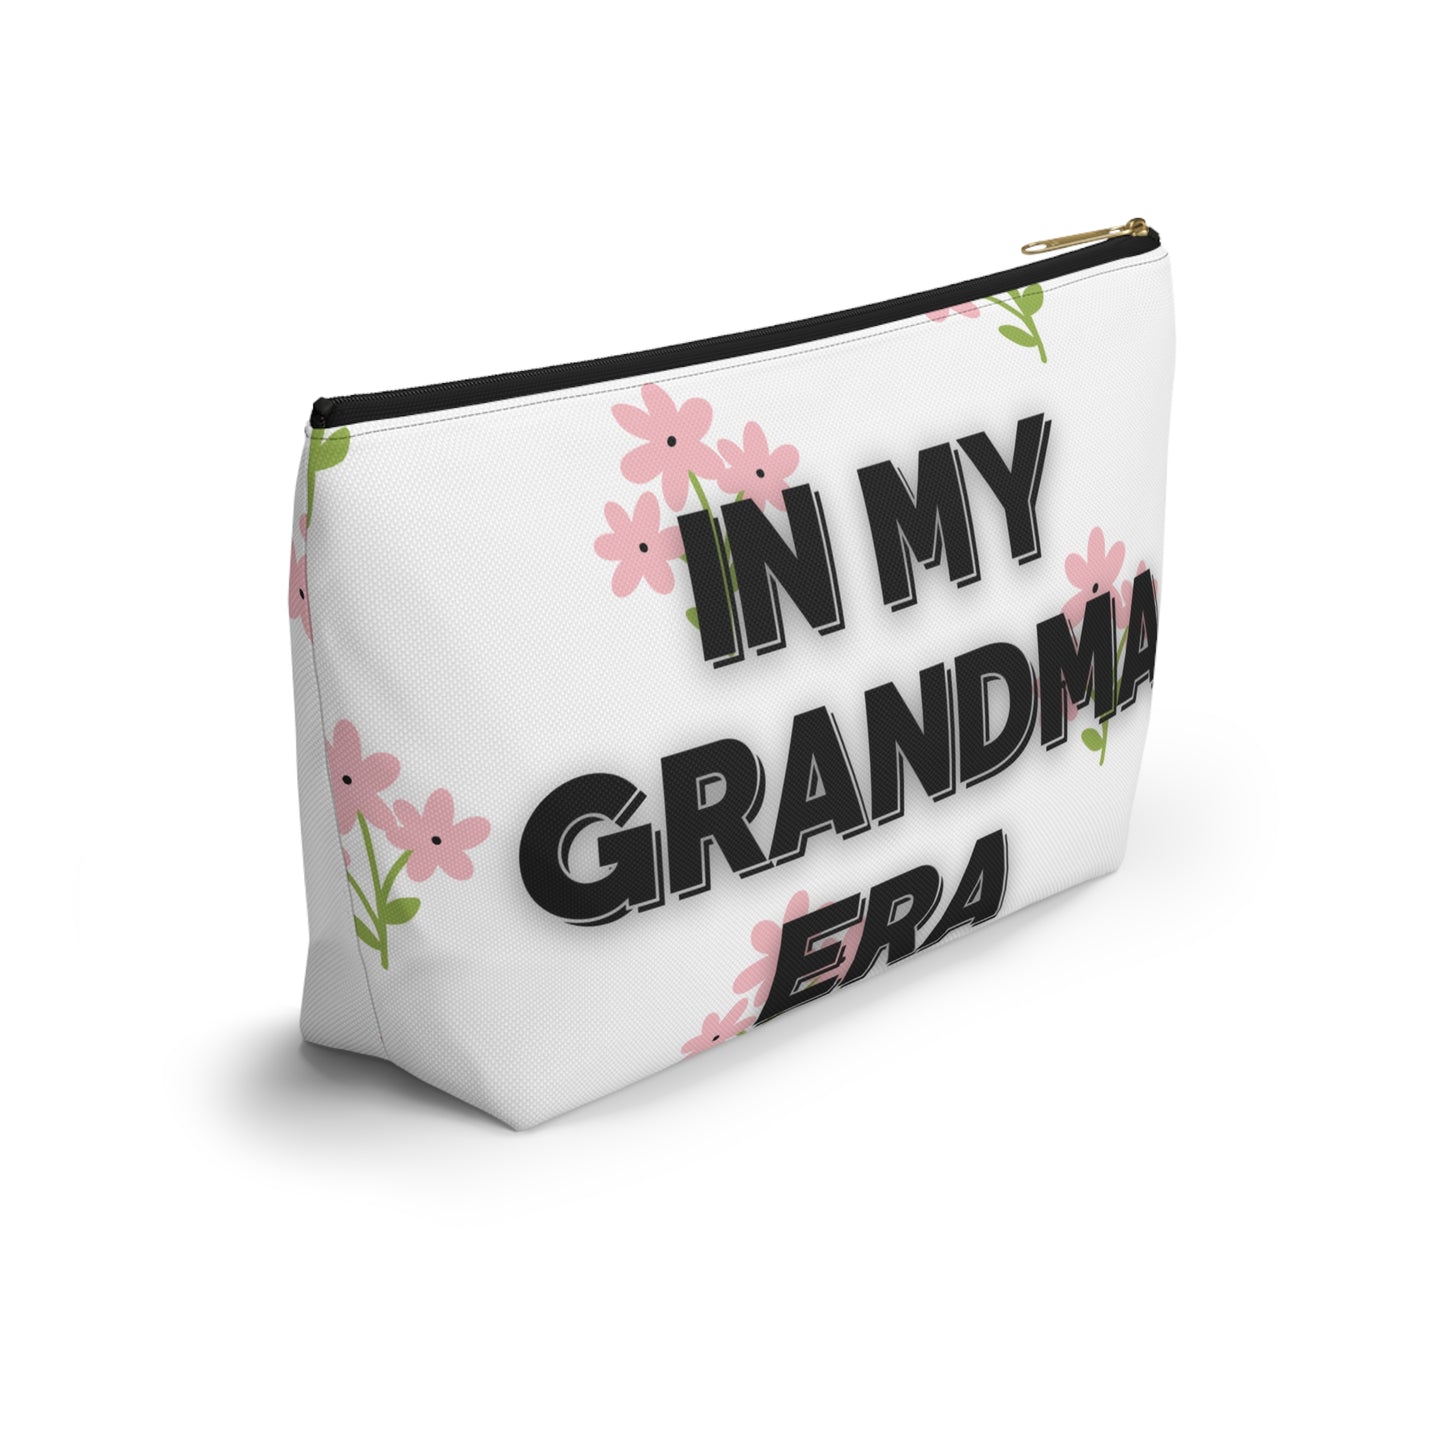 Everyday bag with T-bottom, perfect for accessories, makeup or travel, gifts for mom, Mother's Day (in my grandma era)